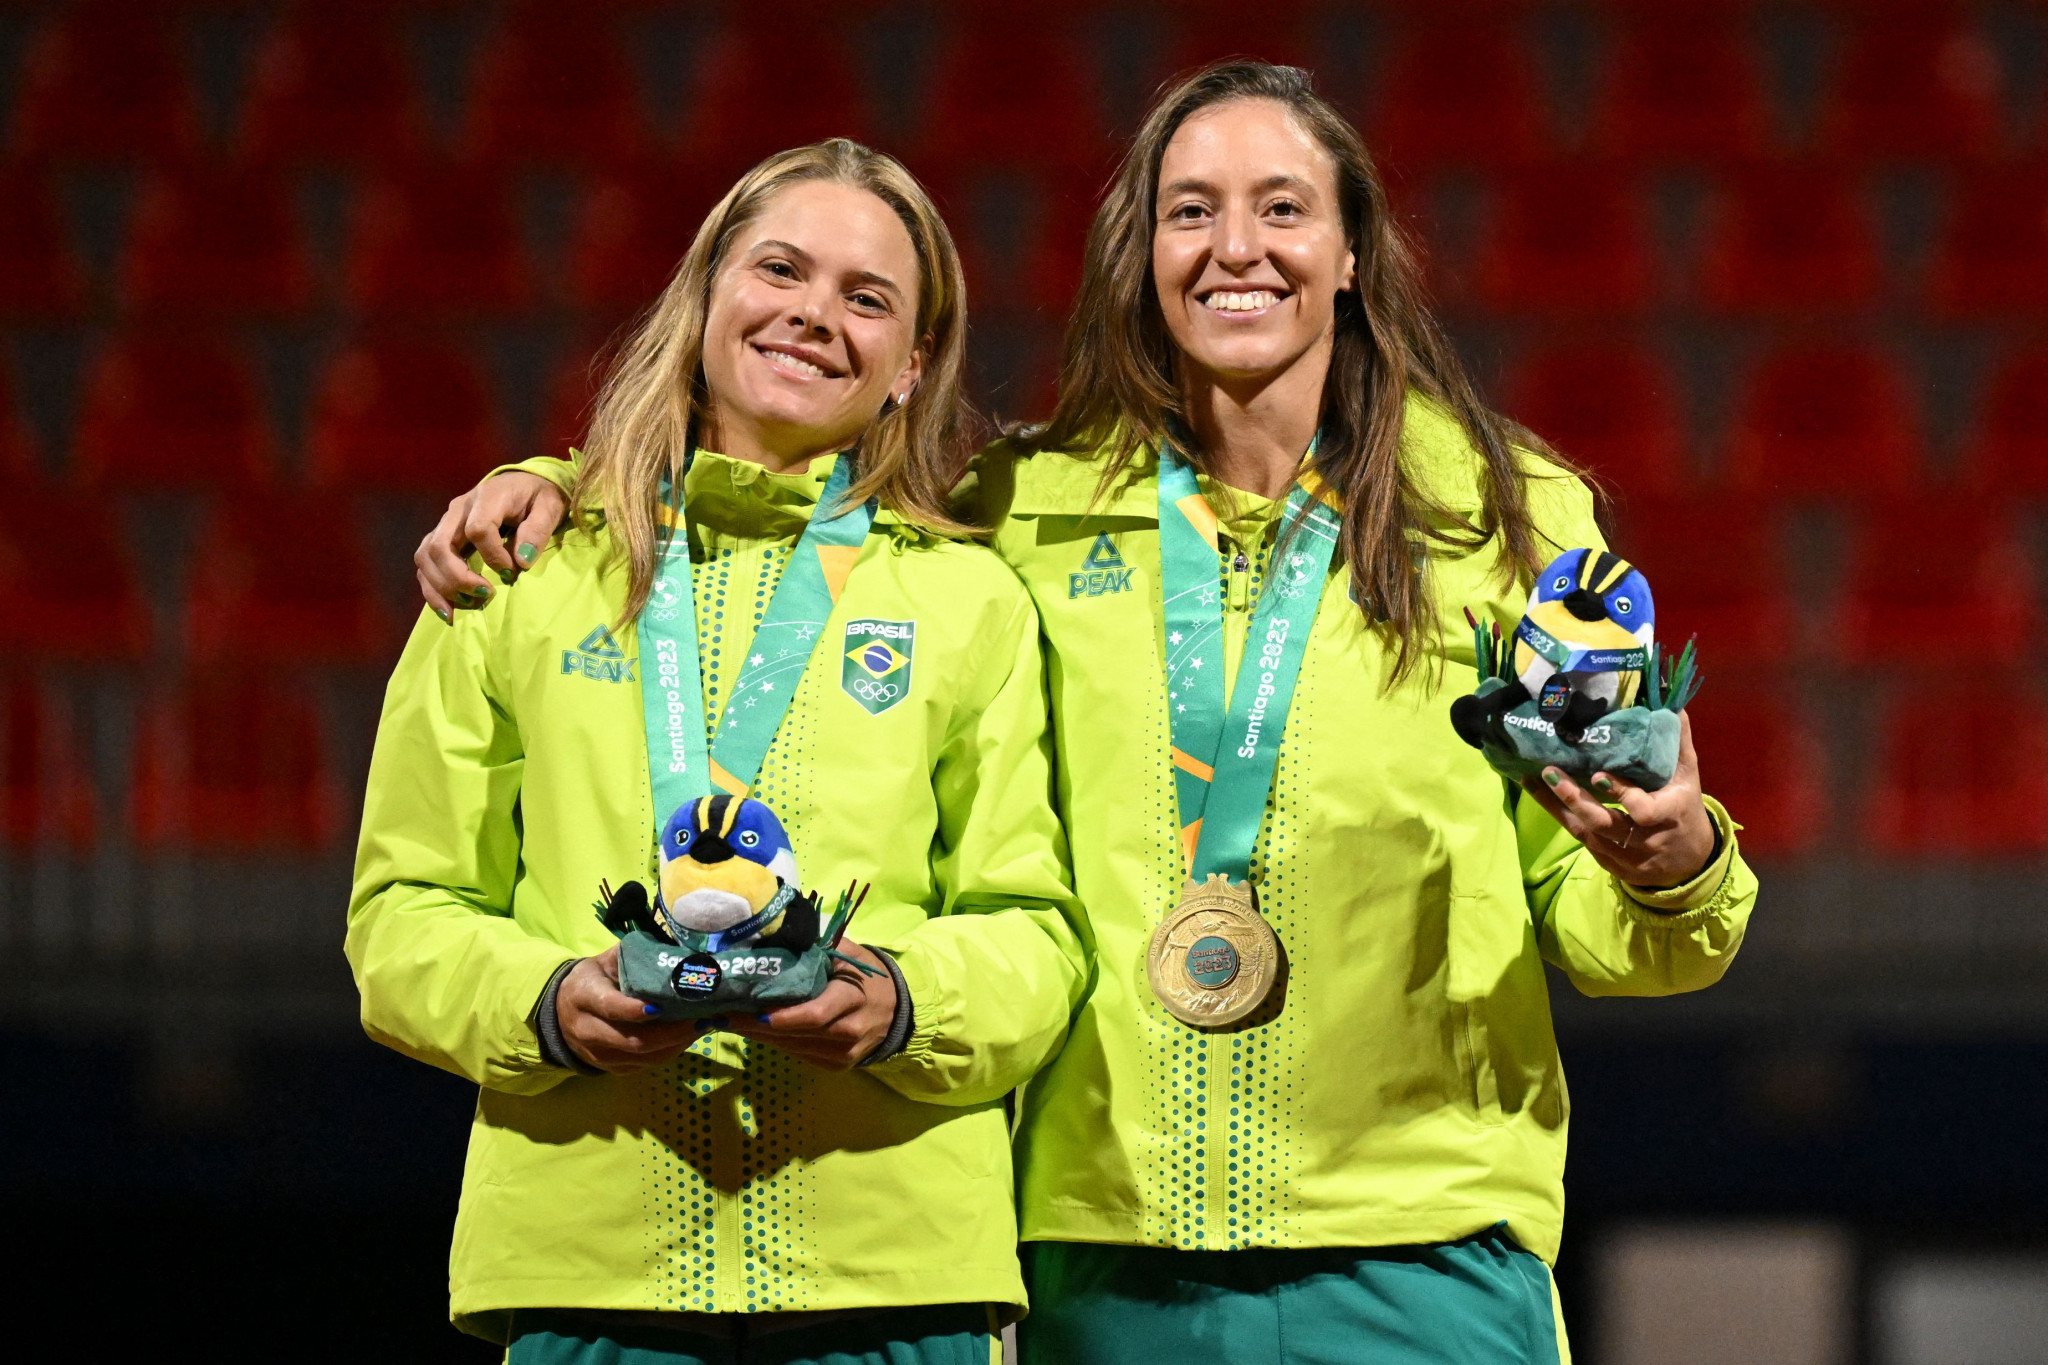 Olympic bronze medallists Laura Pigossi and Luisa Stefani added to the Brazilian haul, winning women's doubles against Colombia's Fernanda Herazo and Paulina Pérez ©Getty Images
